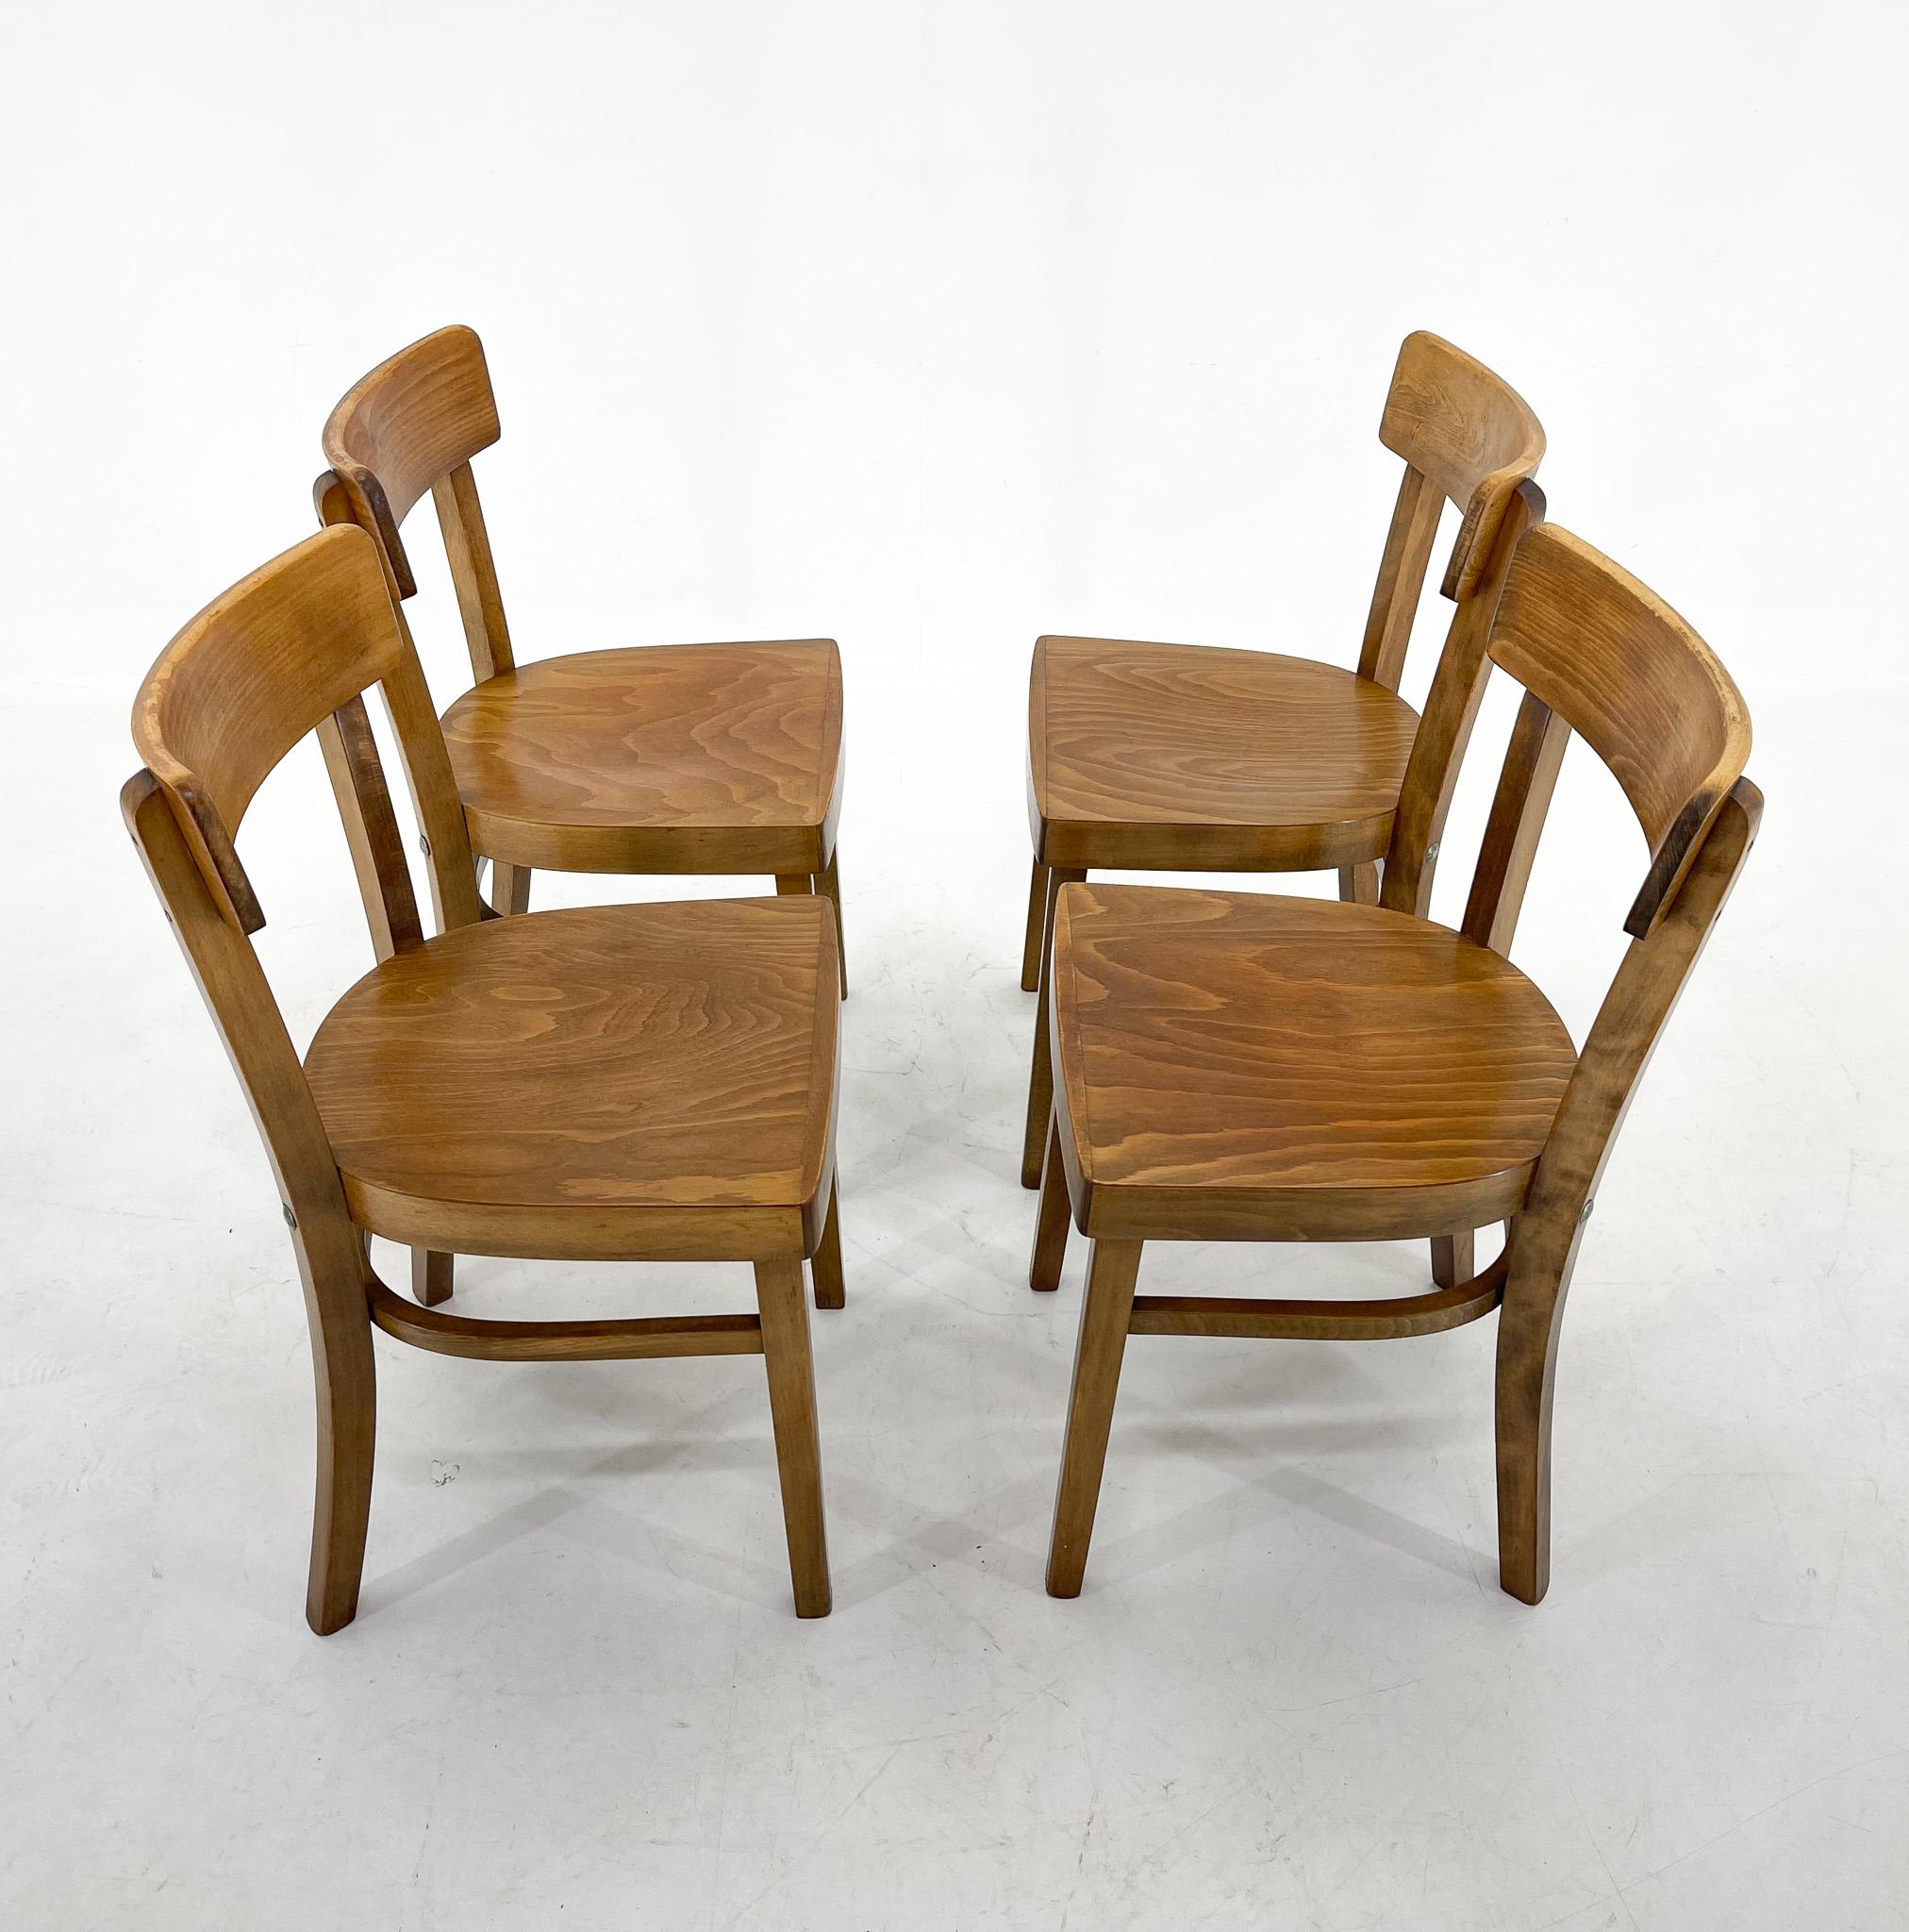 Set of four wooden dining chairs, made in former Czechoslovakia in the 1960s by famous TON.